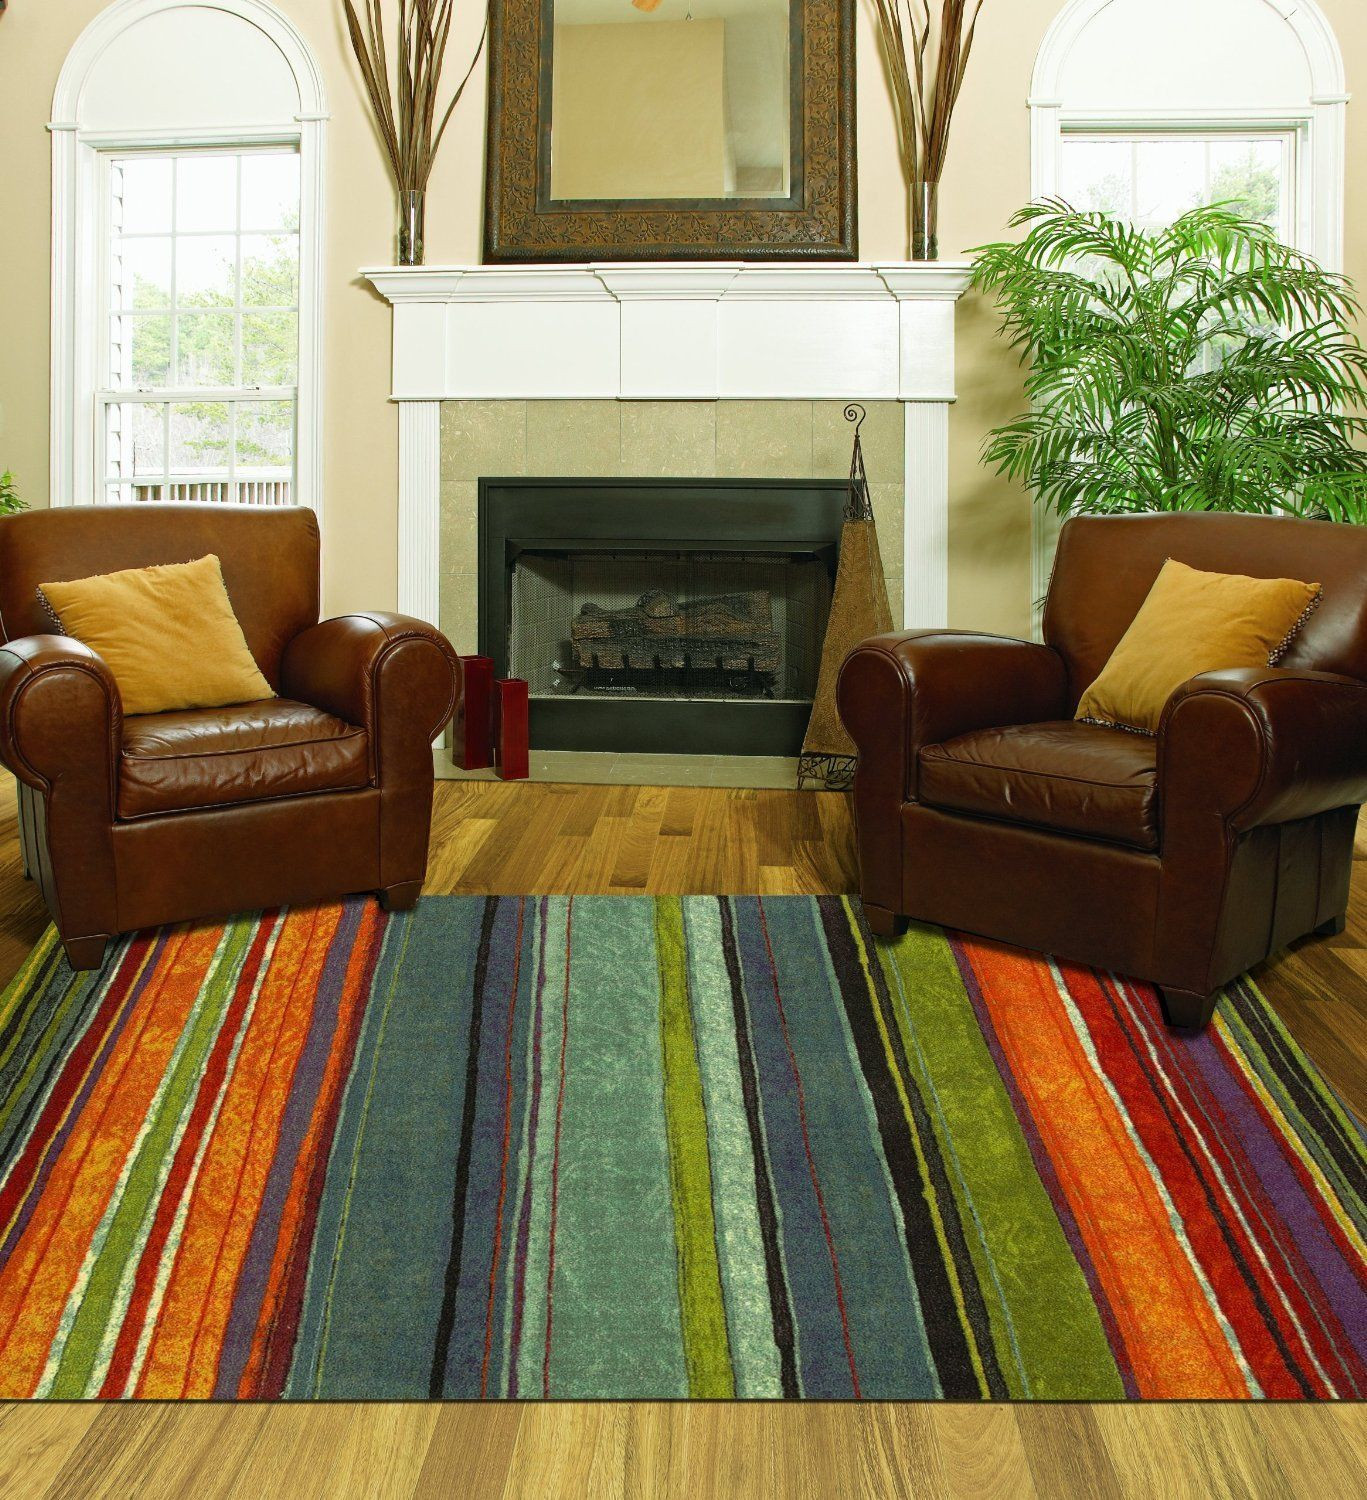 Large Rugs For Living Room
 Area Rug Colorful 8x10 Living Room Size Carpet Home